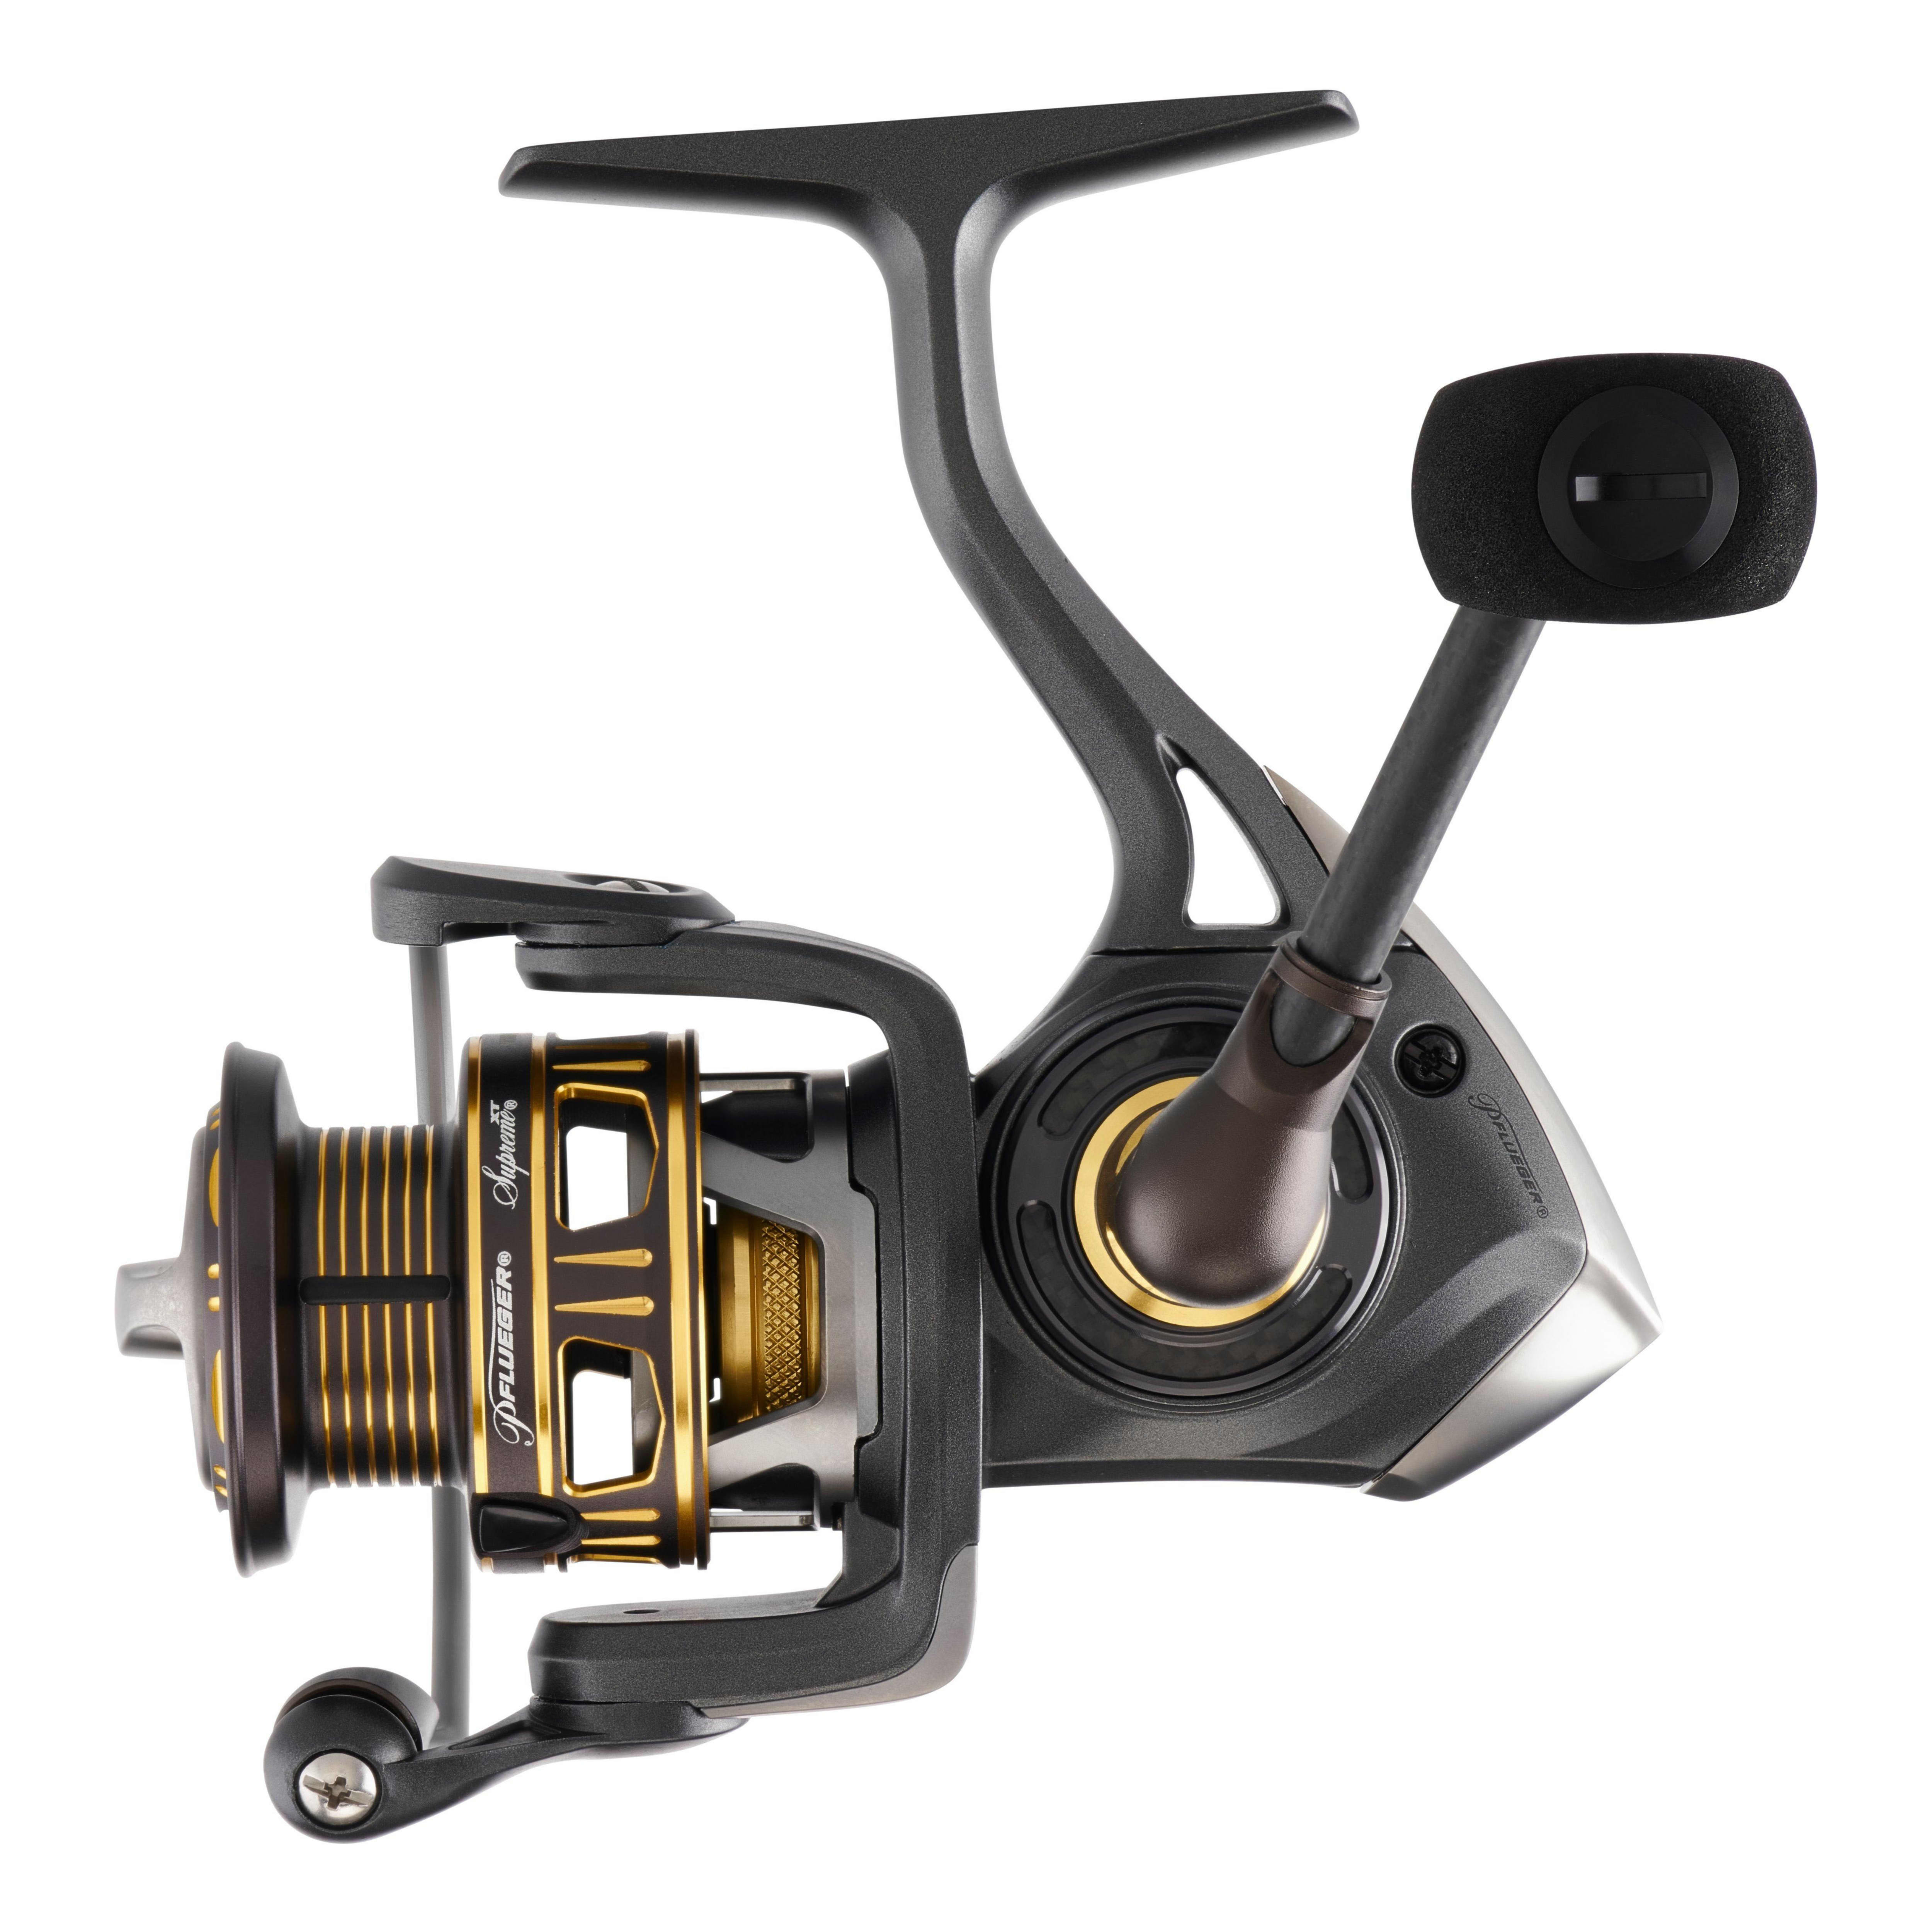 Discount Pflueger Supreme XT Low Profile - Baitcasting Reel (6.4:1) Right  Handed for Sale, Online Fishing Reels Store